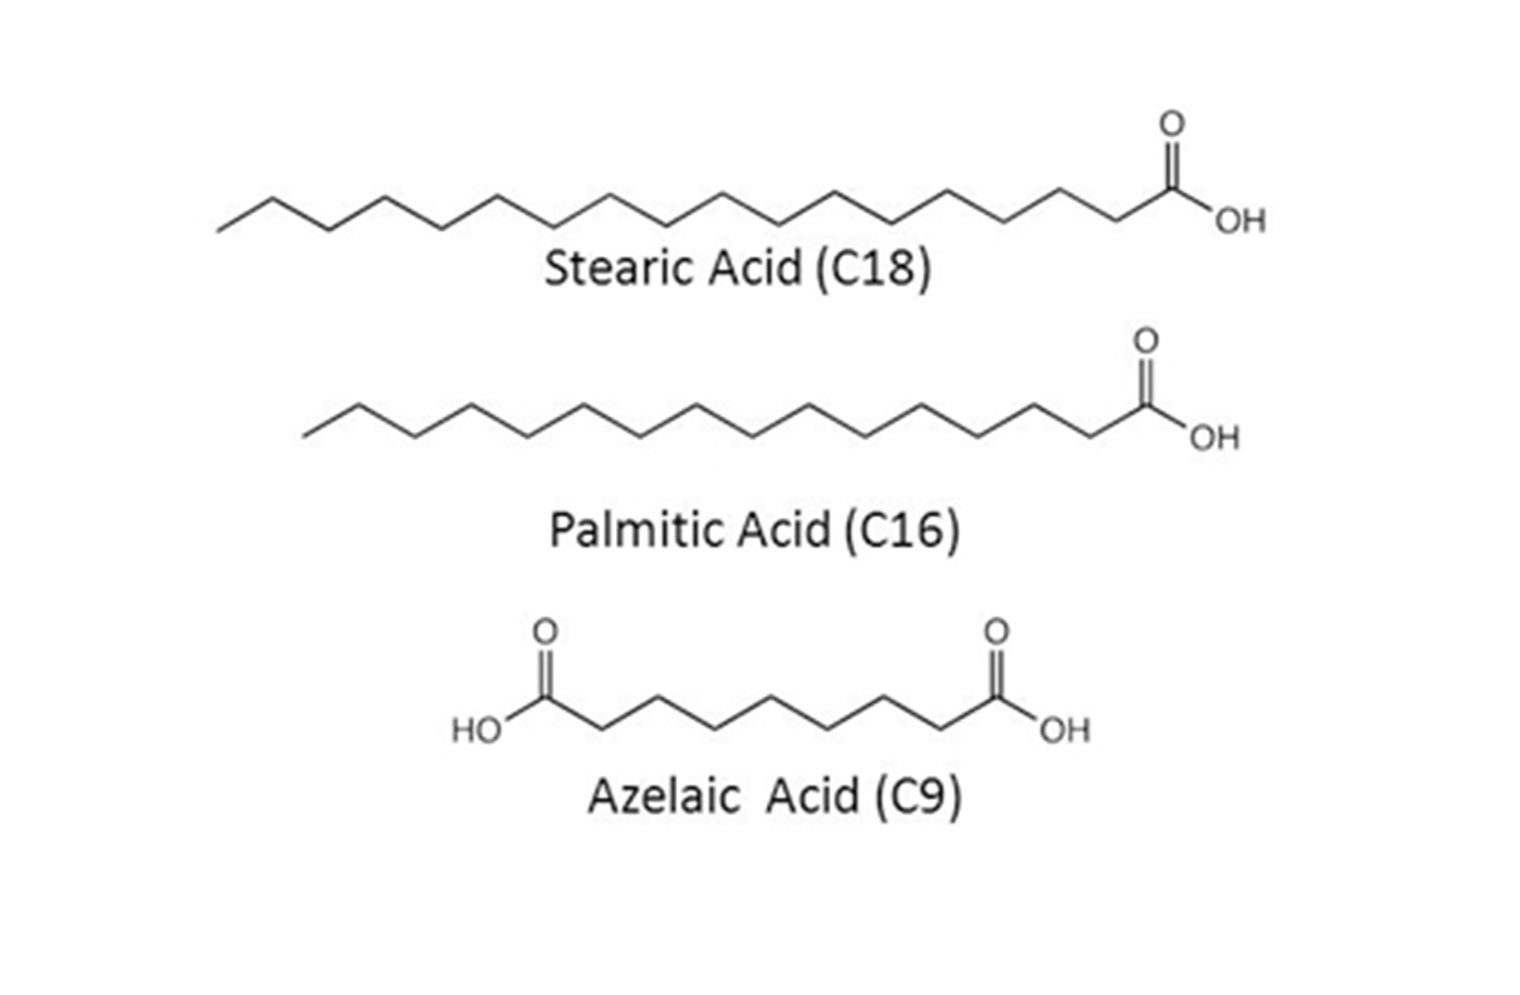 Fig. 2. Structure of stearic, palmitic, and azelaic acids. These fatty acids result from the hydrolysis of glycerides in the oil binding medium and react with heavy metal–containing pigments to form heavy metal soaps.